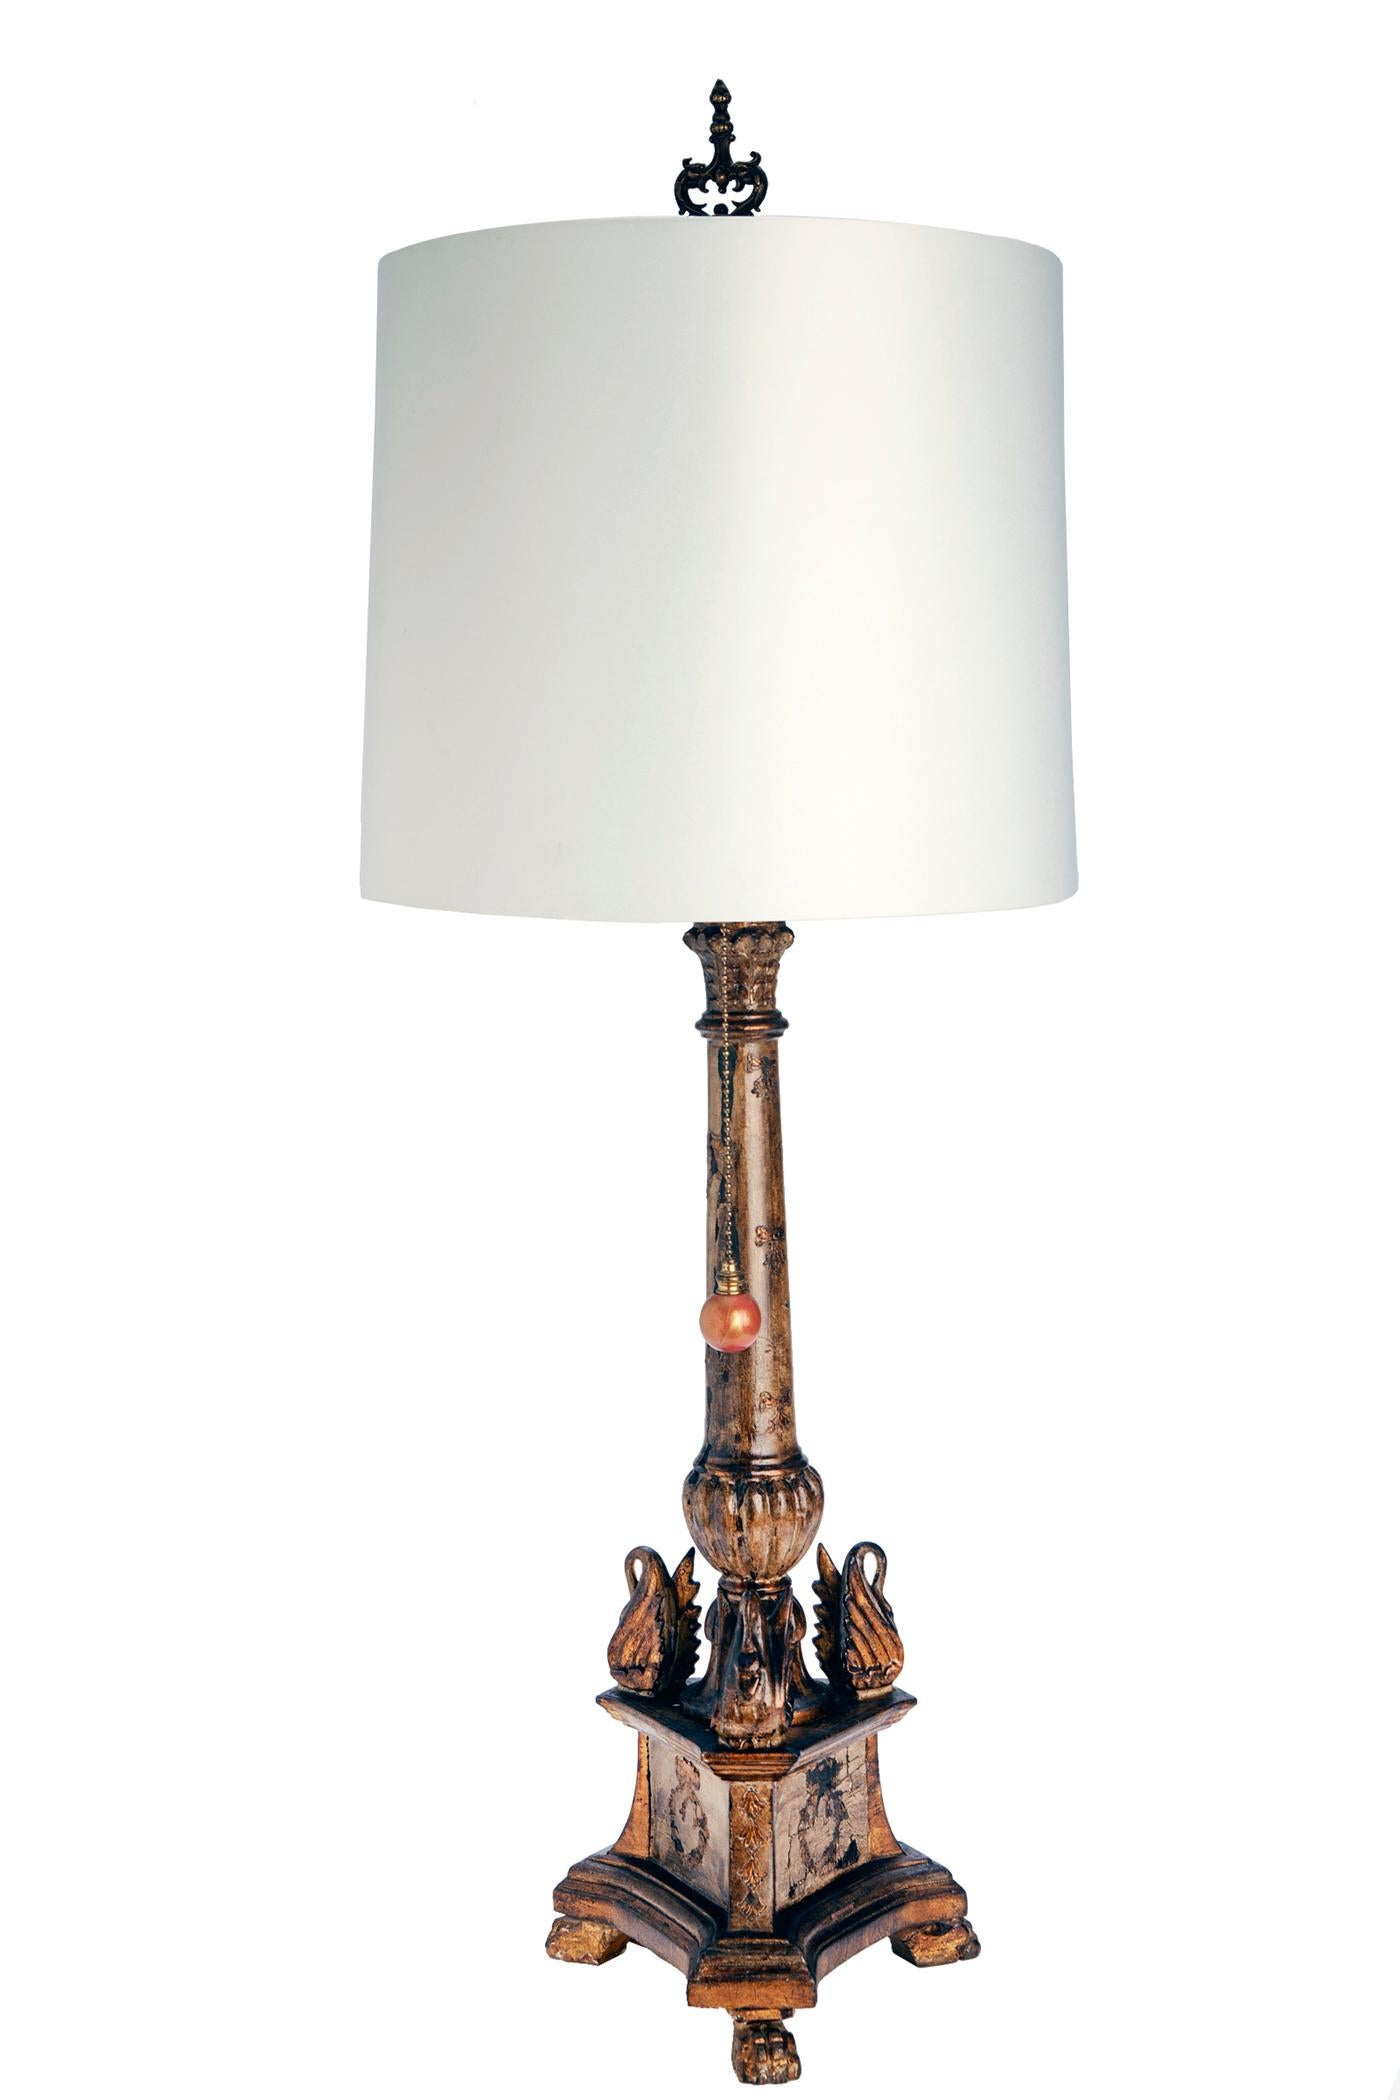 Hand-Painted Hand Carved Table Lamps White Shades; a pair For Sale